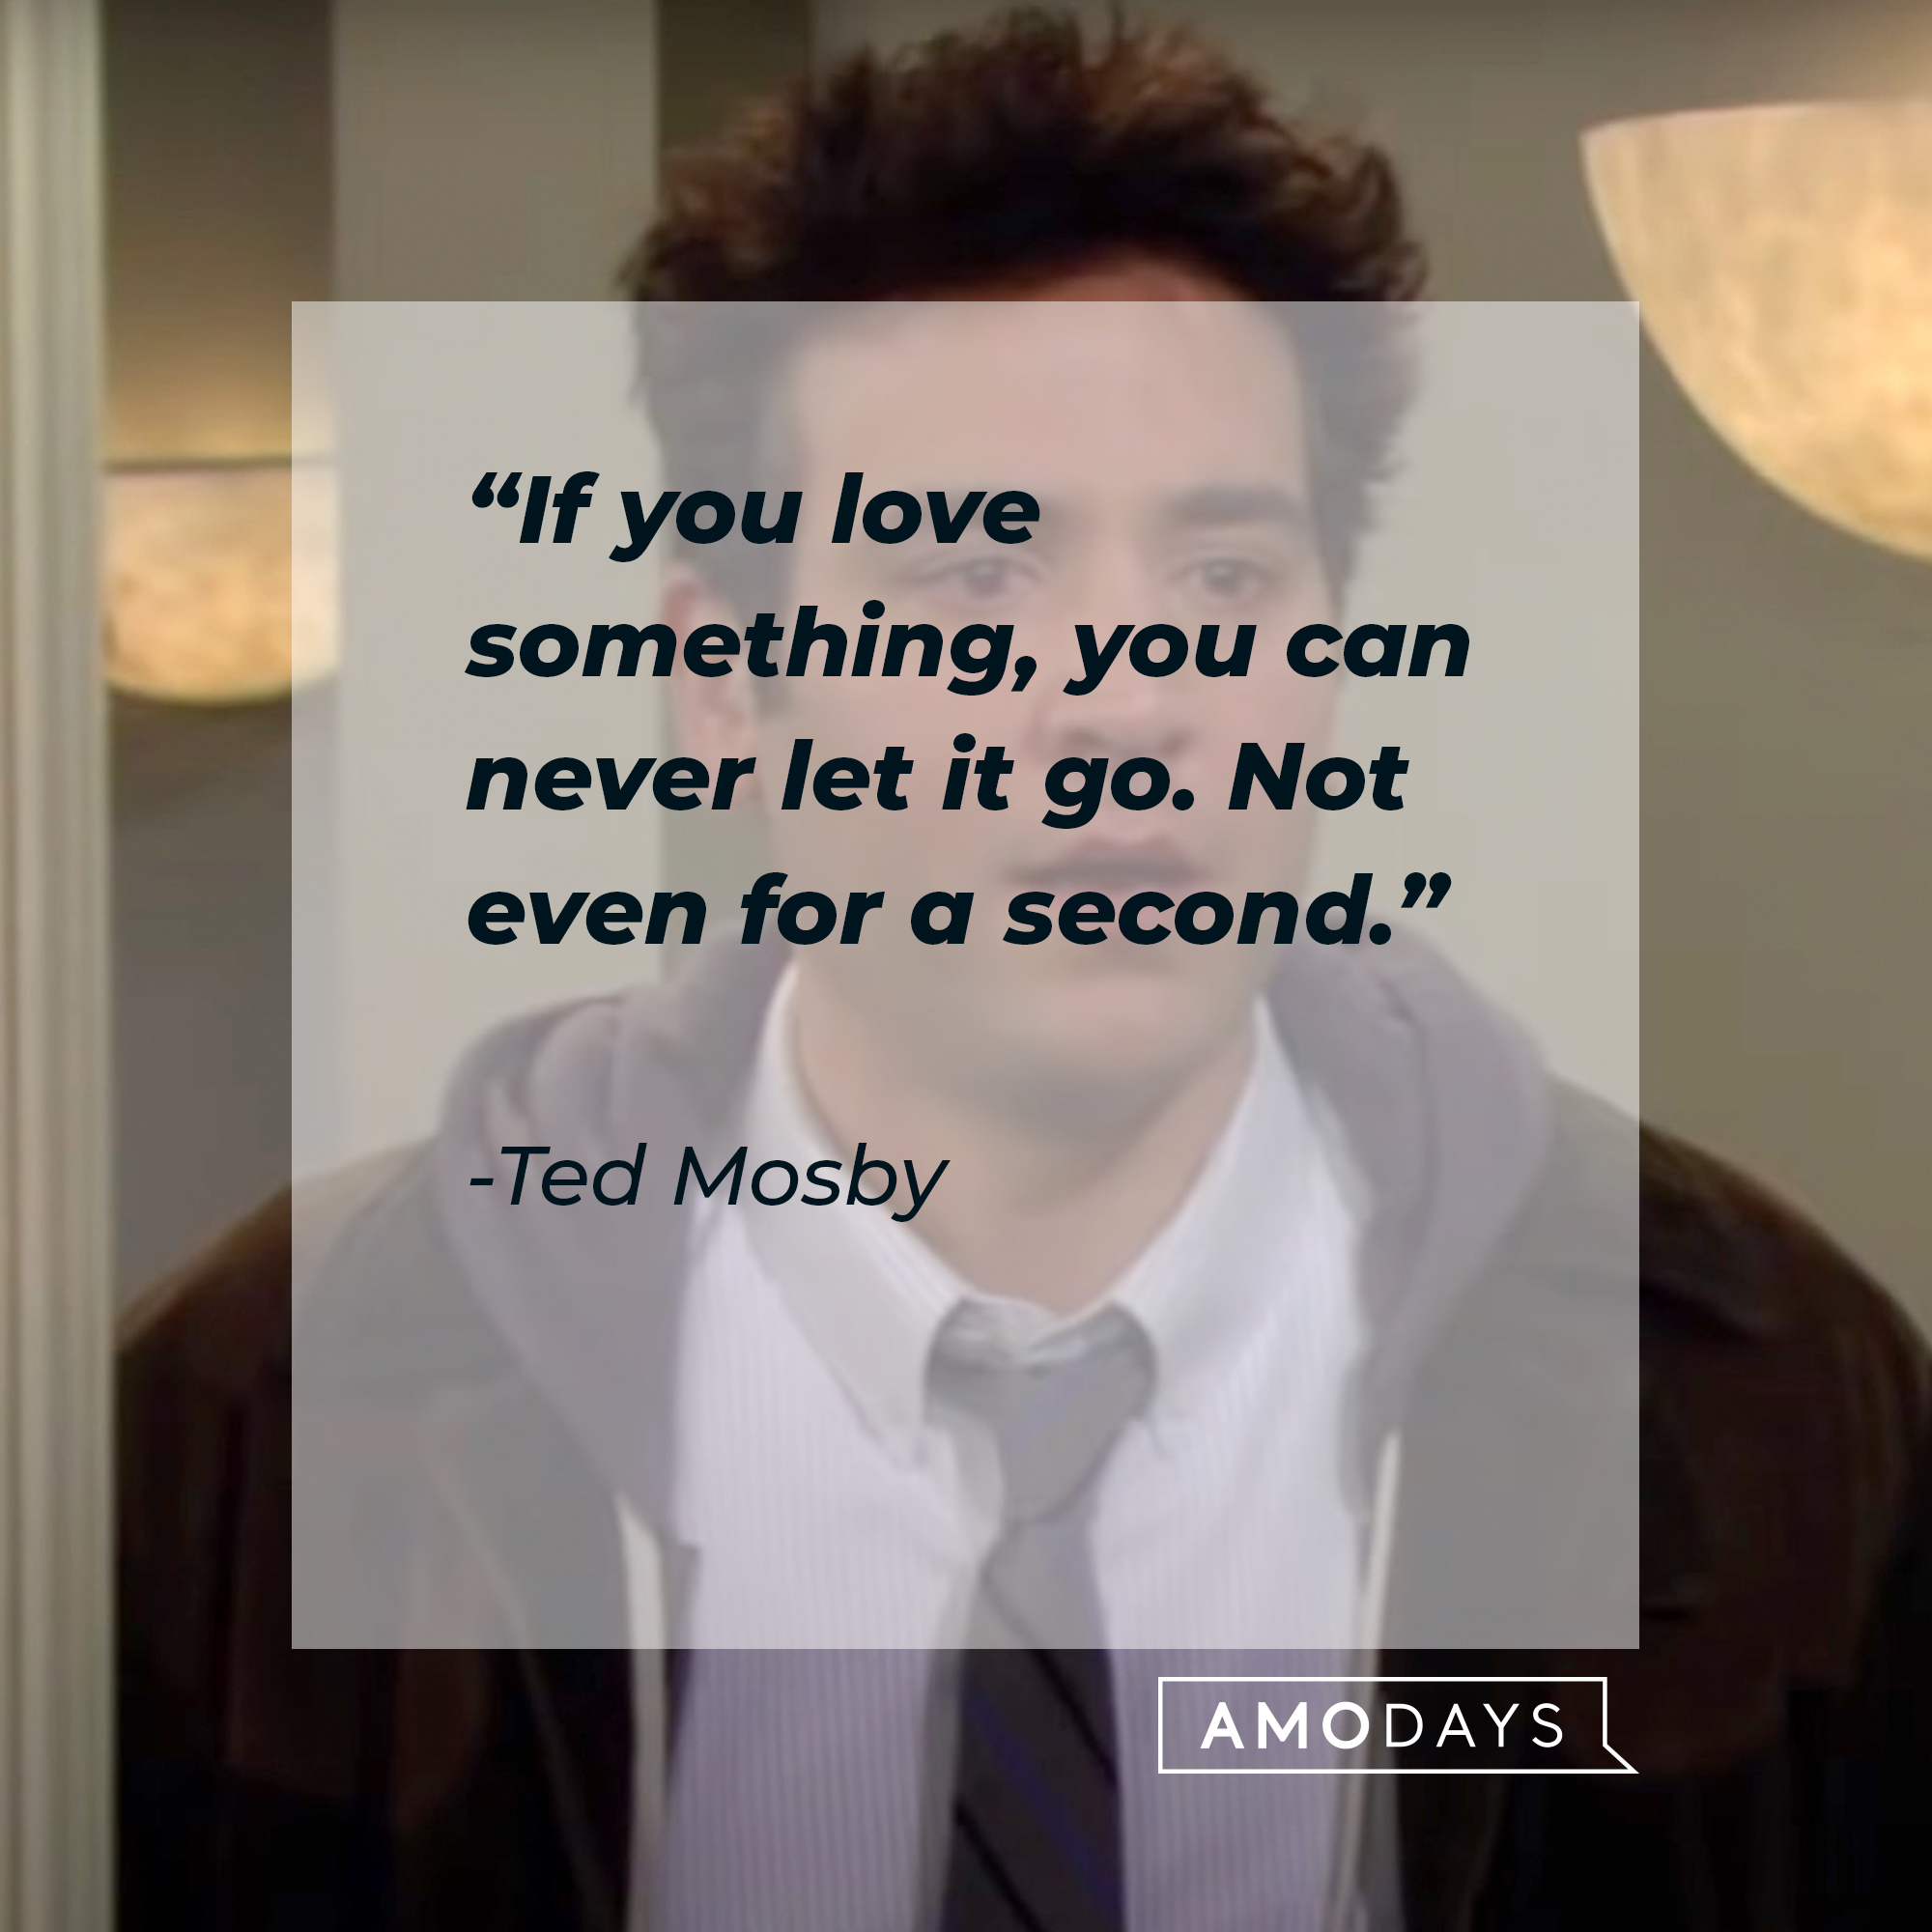 An image of Ted Mosby with his quote: “If you love something, you can never let it go. Not even for a second.” | Source: facebook.com/OfficialHowIMetYourMother